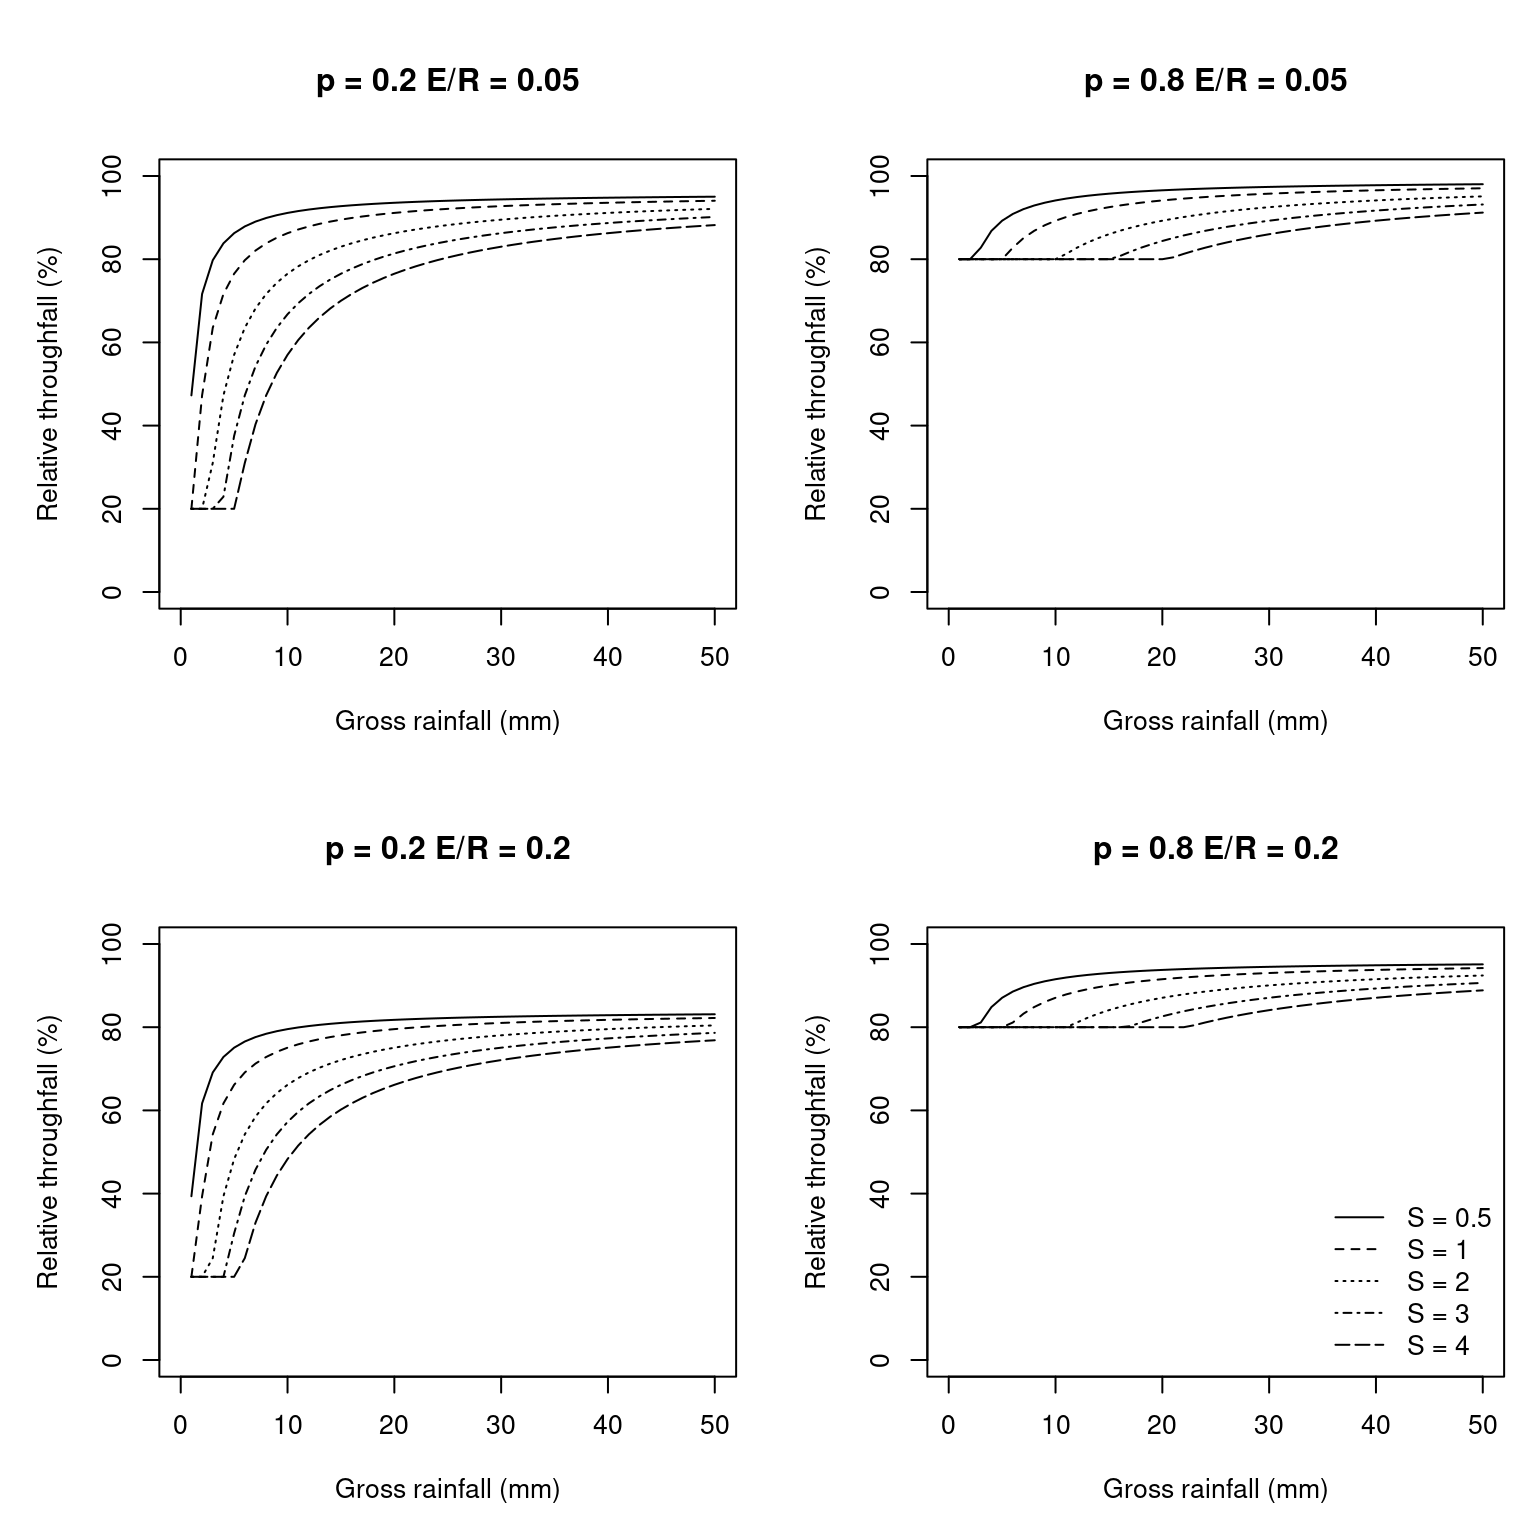 Examples of canopy interception with different \(S_{canopy}\) (canopy water storage capacity), \(ER_{ratio}\) (ratio between evaporation and rainfall rates) and \(p\) (throughfall coefficient; \(p = 1 - C_{canopy}\)), using the Gash (1995) model.